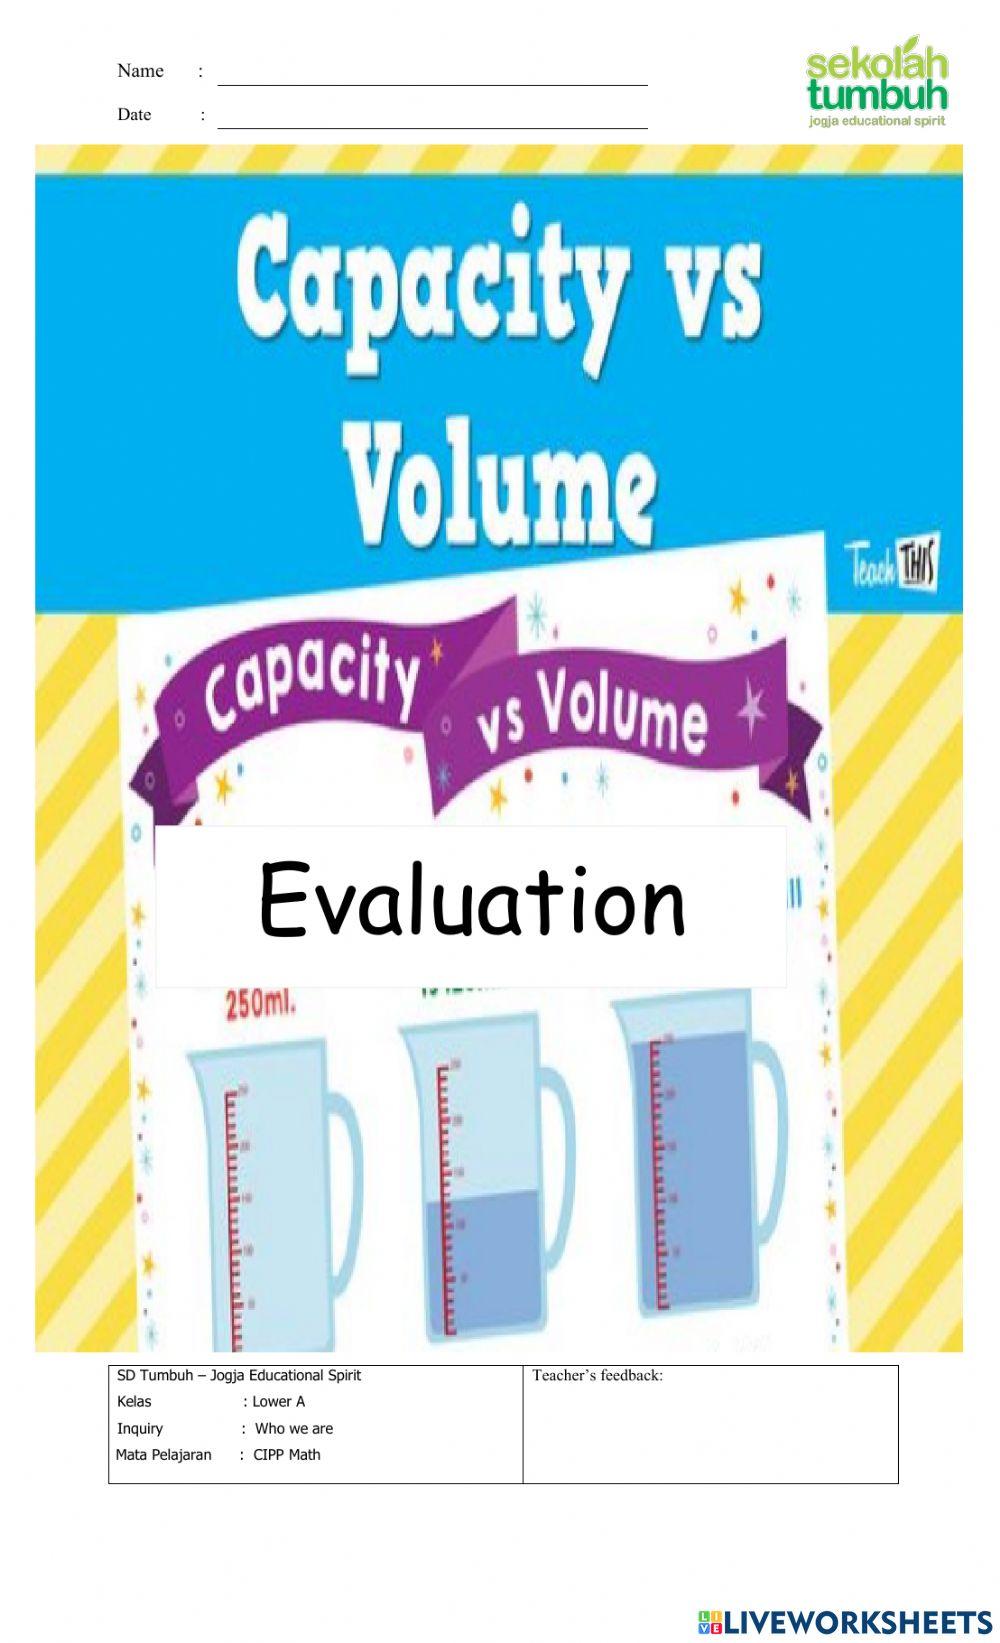 Volume and Capasity-A